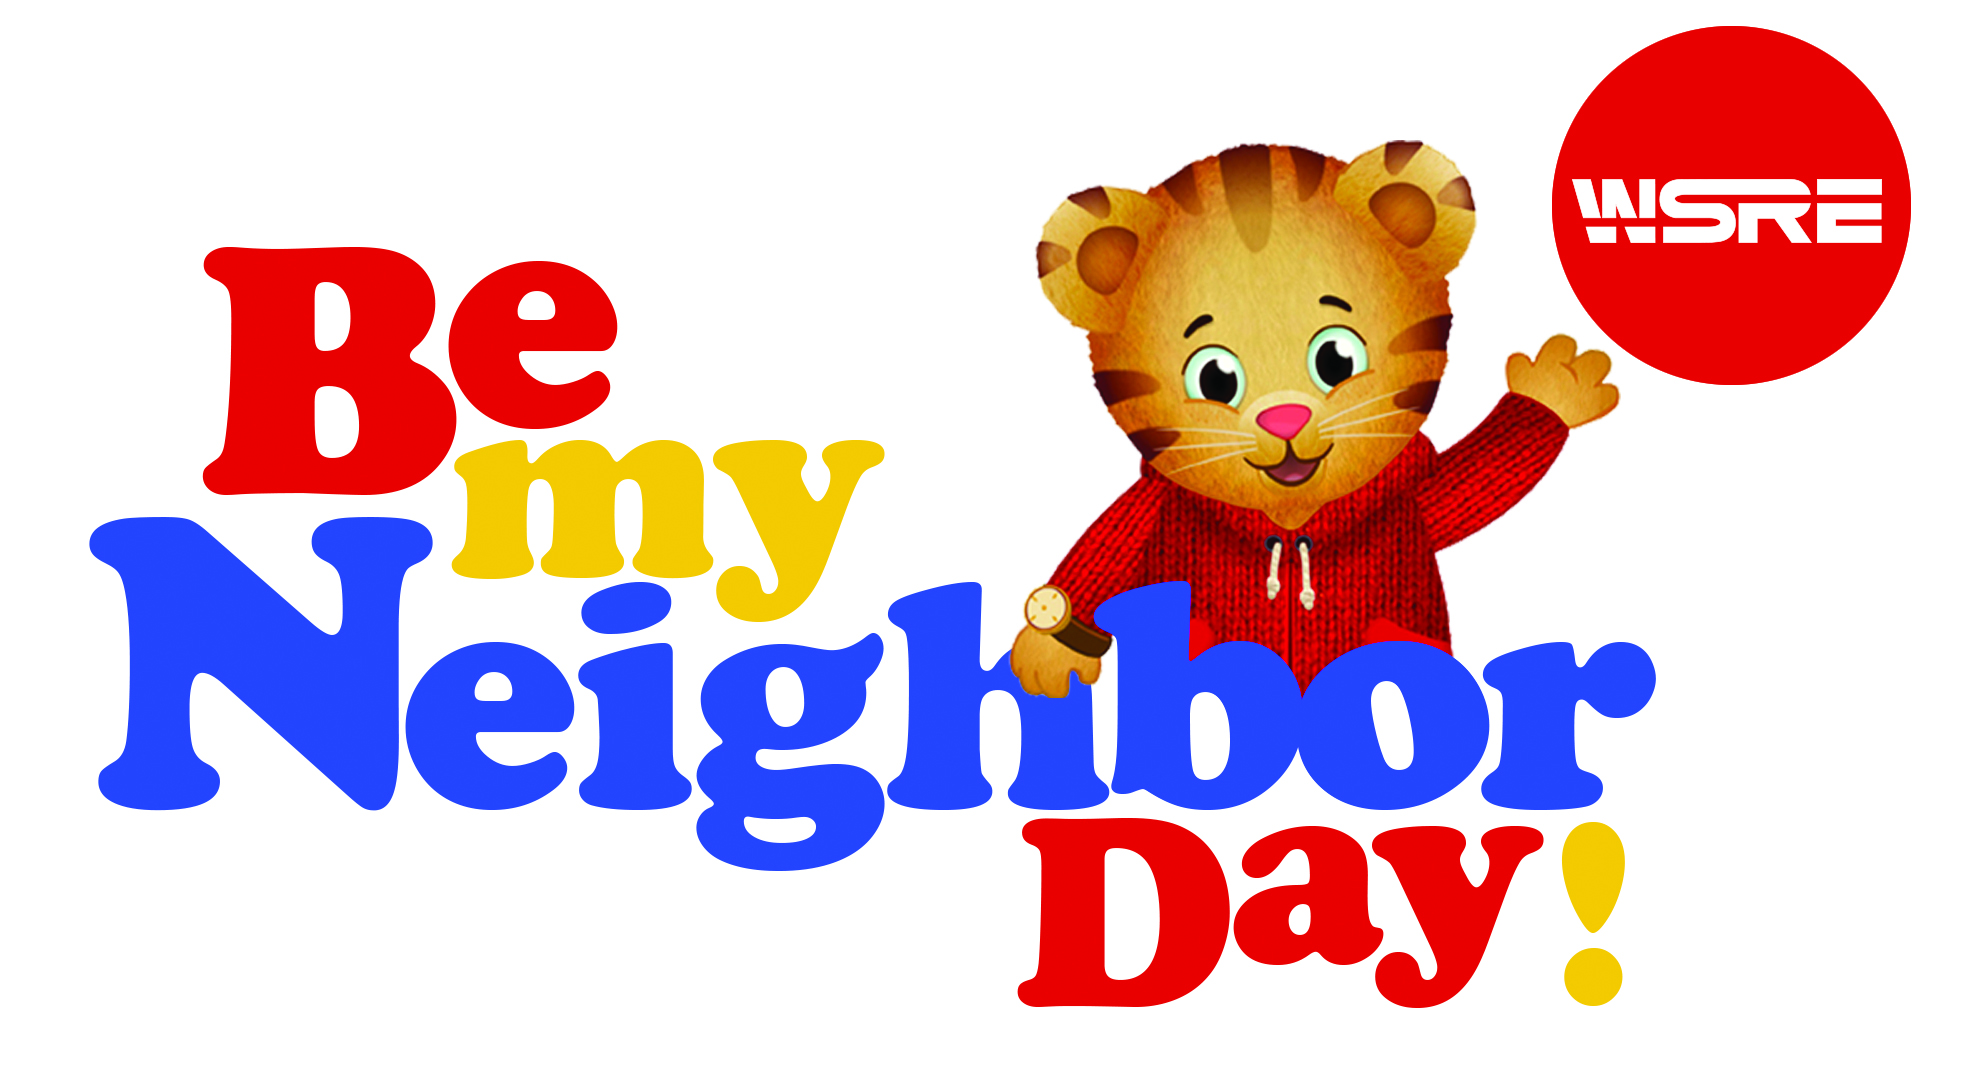 Picture of Daniel Tiger from PBS Children's Programming